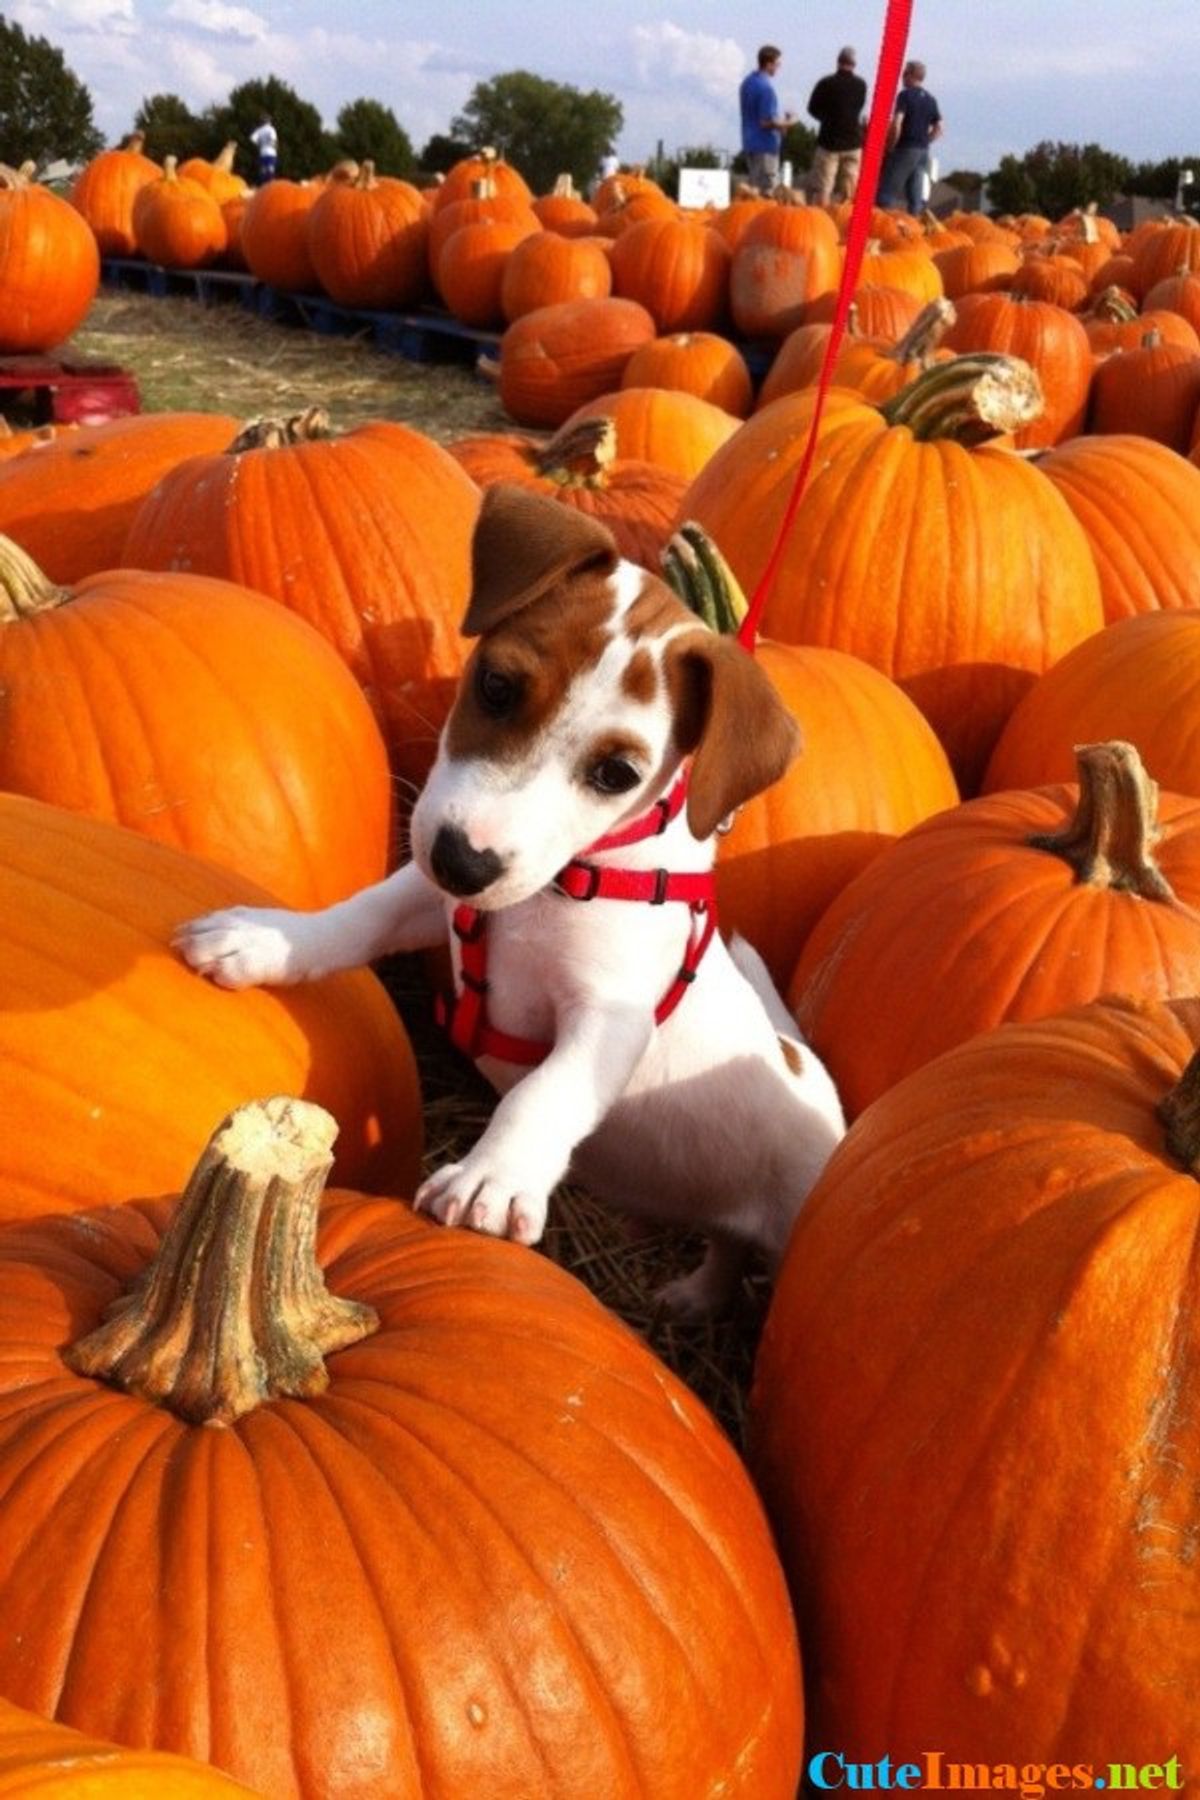 Ten Great Things About October (featuring Dogs)